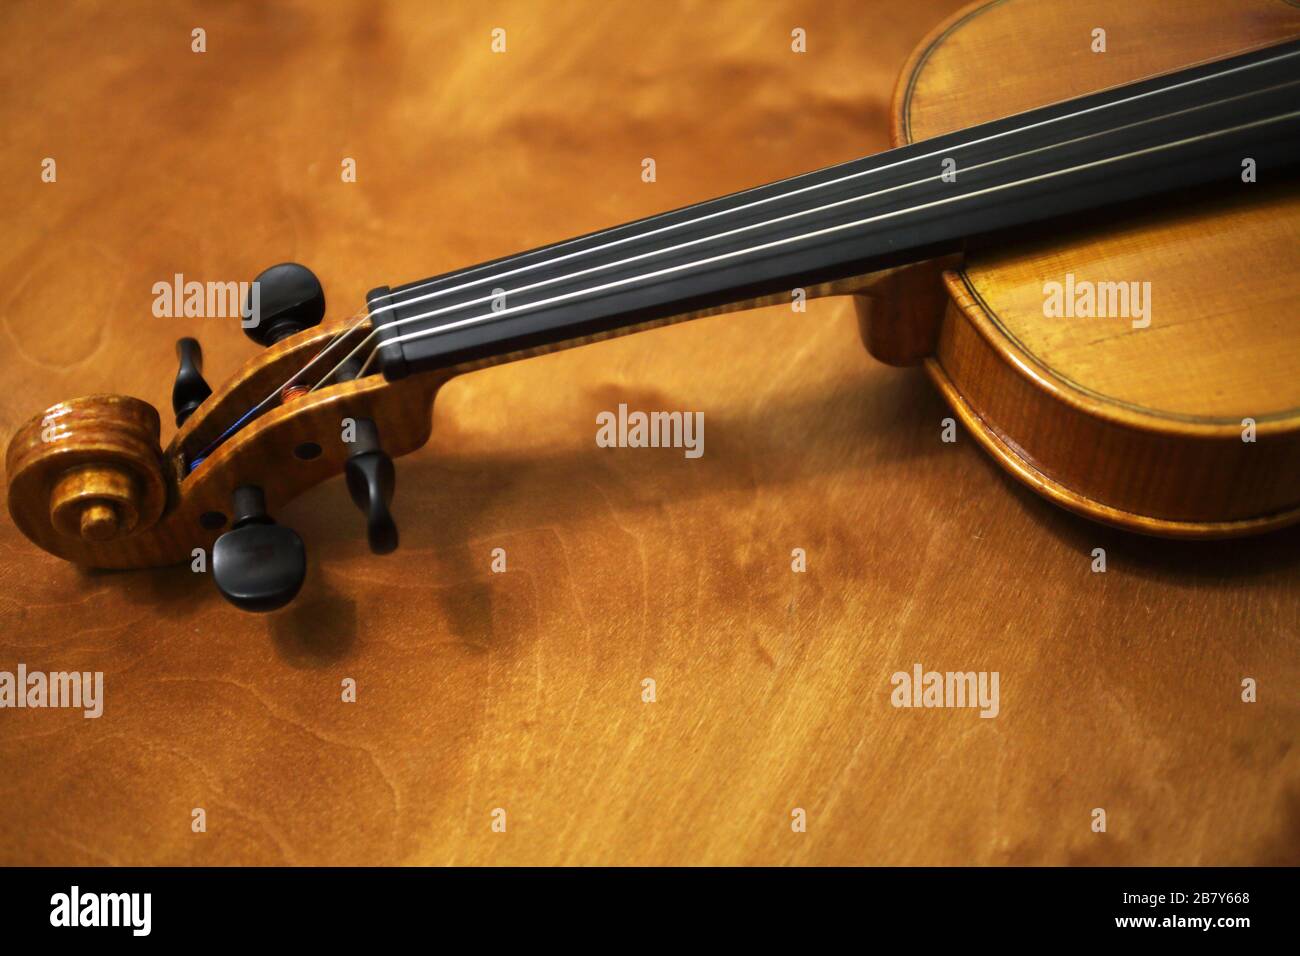 The violin lies on a wooden table, close-up Stock Photo